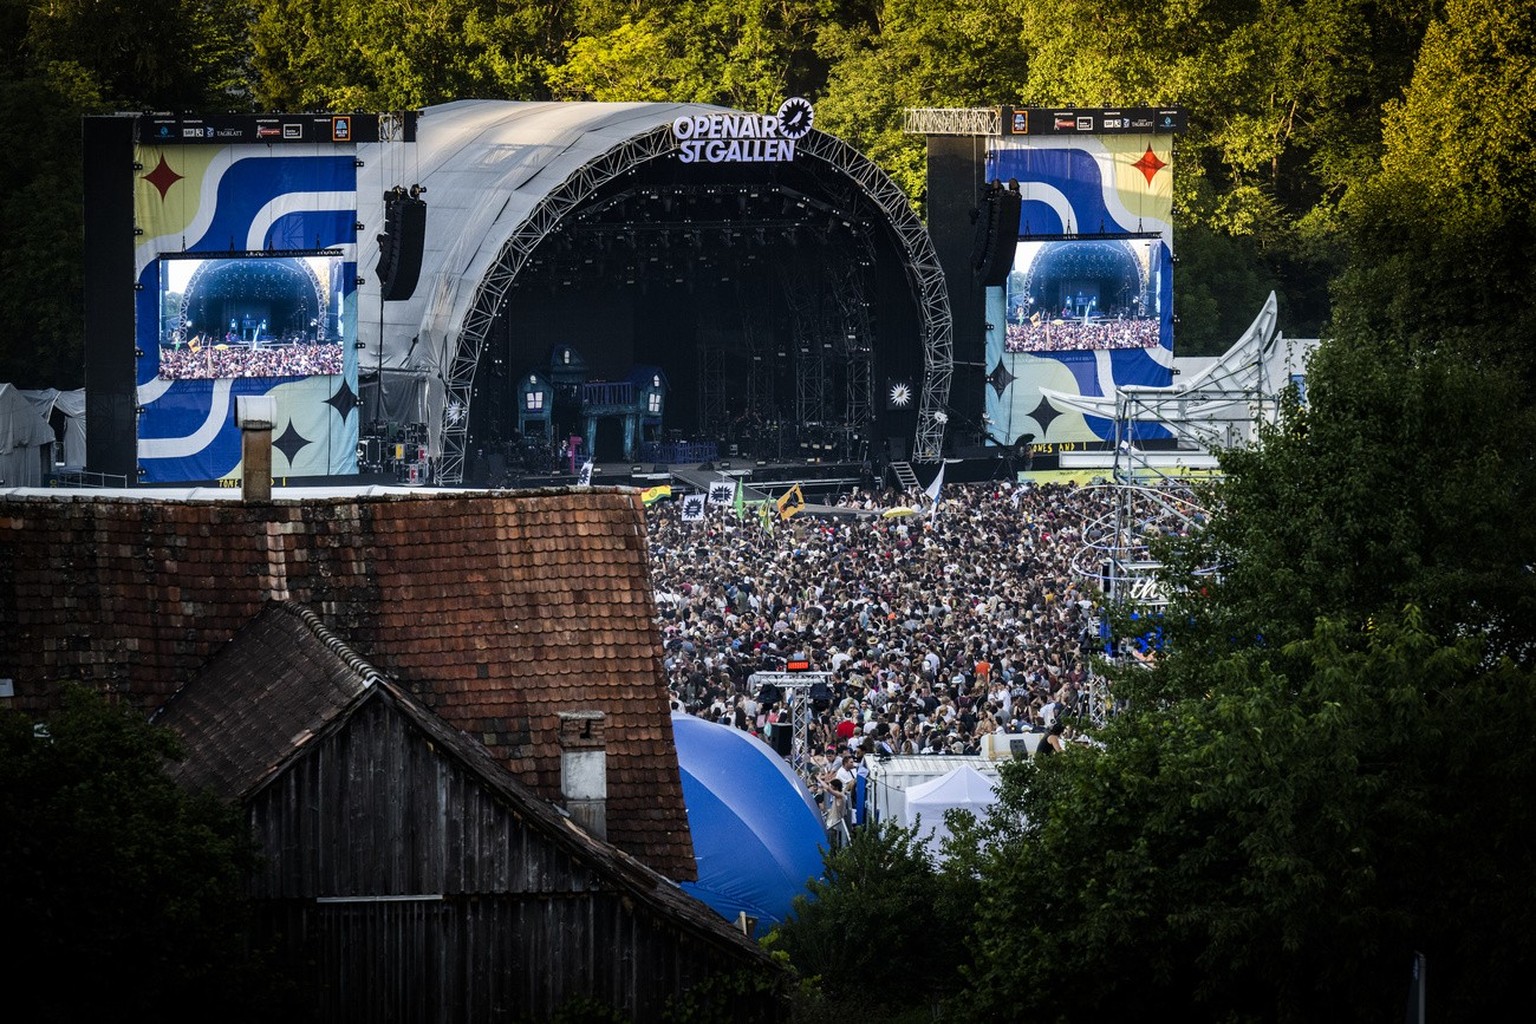 The main stage at the Openair St. Gallen, on Saturday, July 2, 2022, in St. Gallen. The festival will take place until Sunday, July 3, 2022. (KEYSTONE/Gian Ehrenzeller)